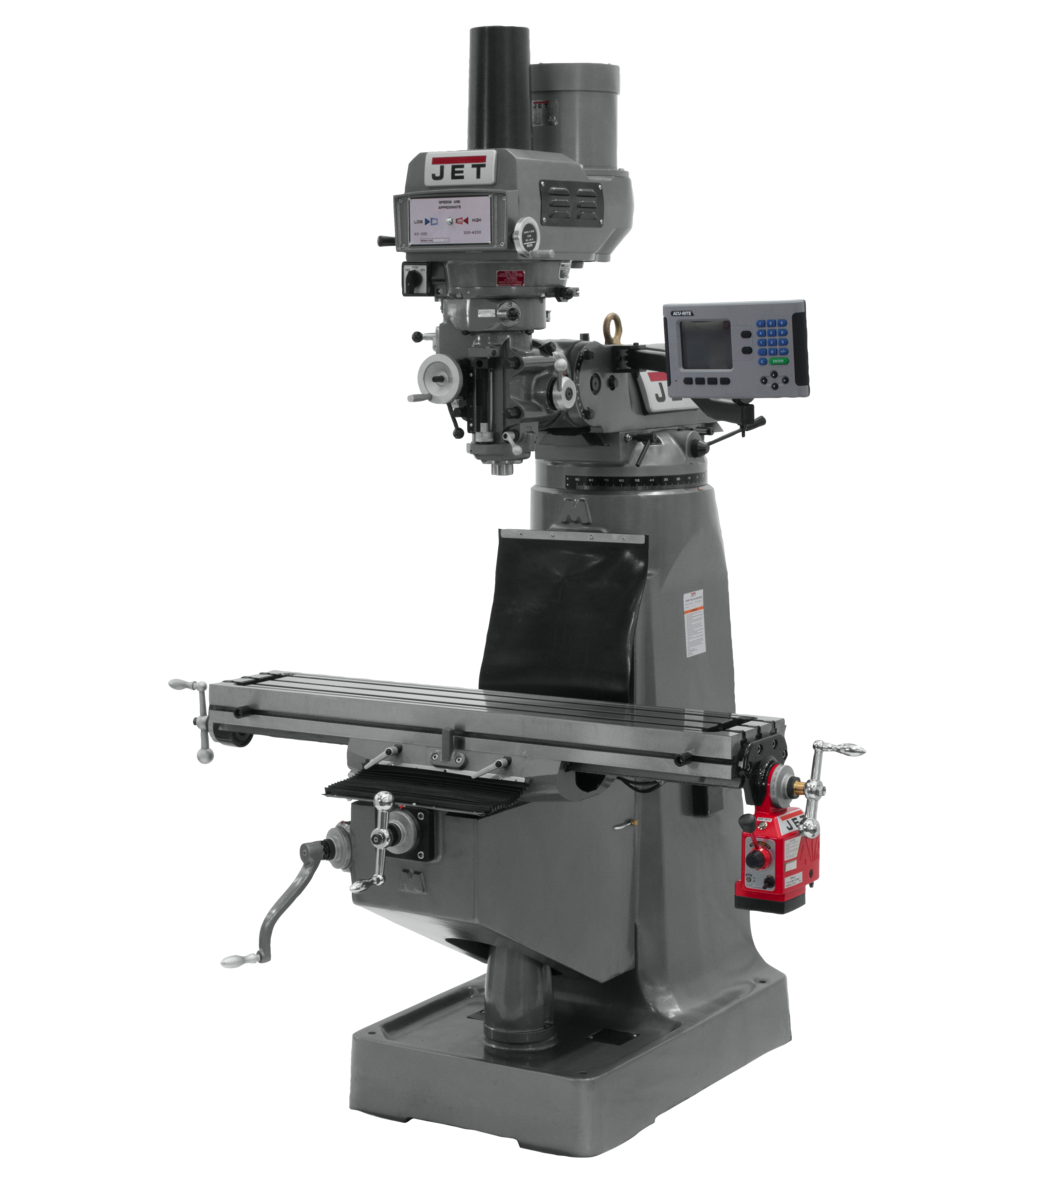 JTM-4VS Mill With 3-Axis ACU-RITE 203 DRO (Quill) With X-Axis Powerfeed and Power Draw Bar